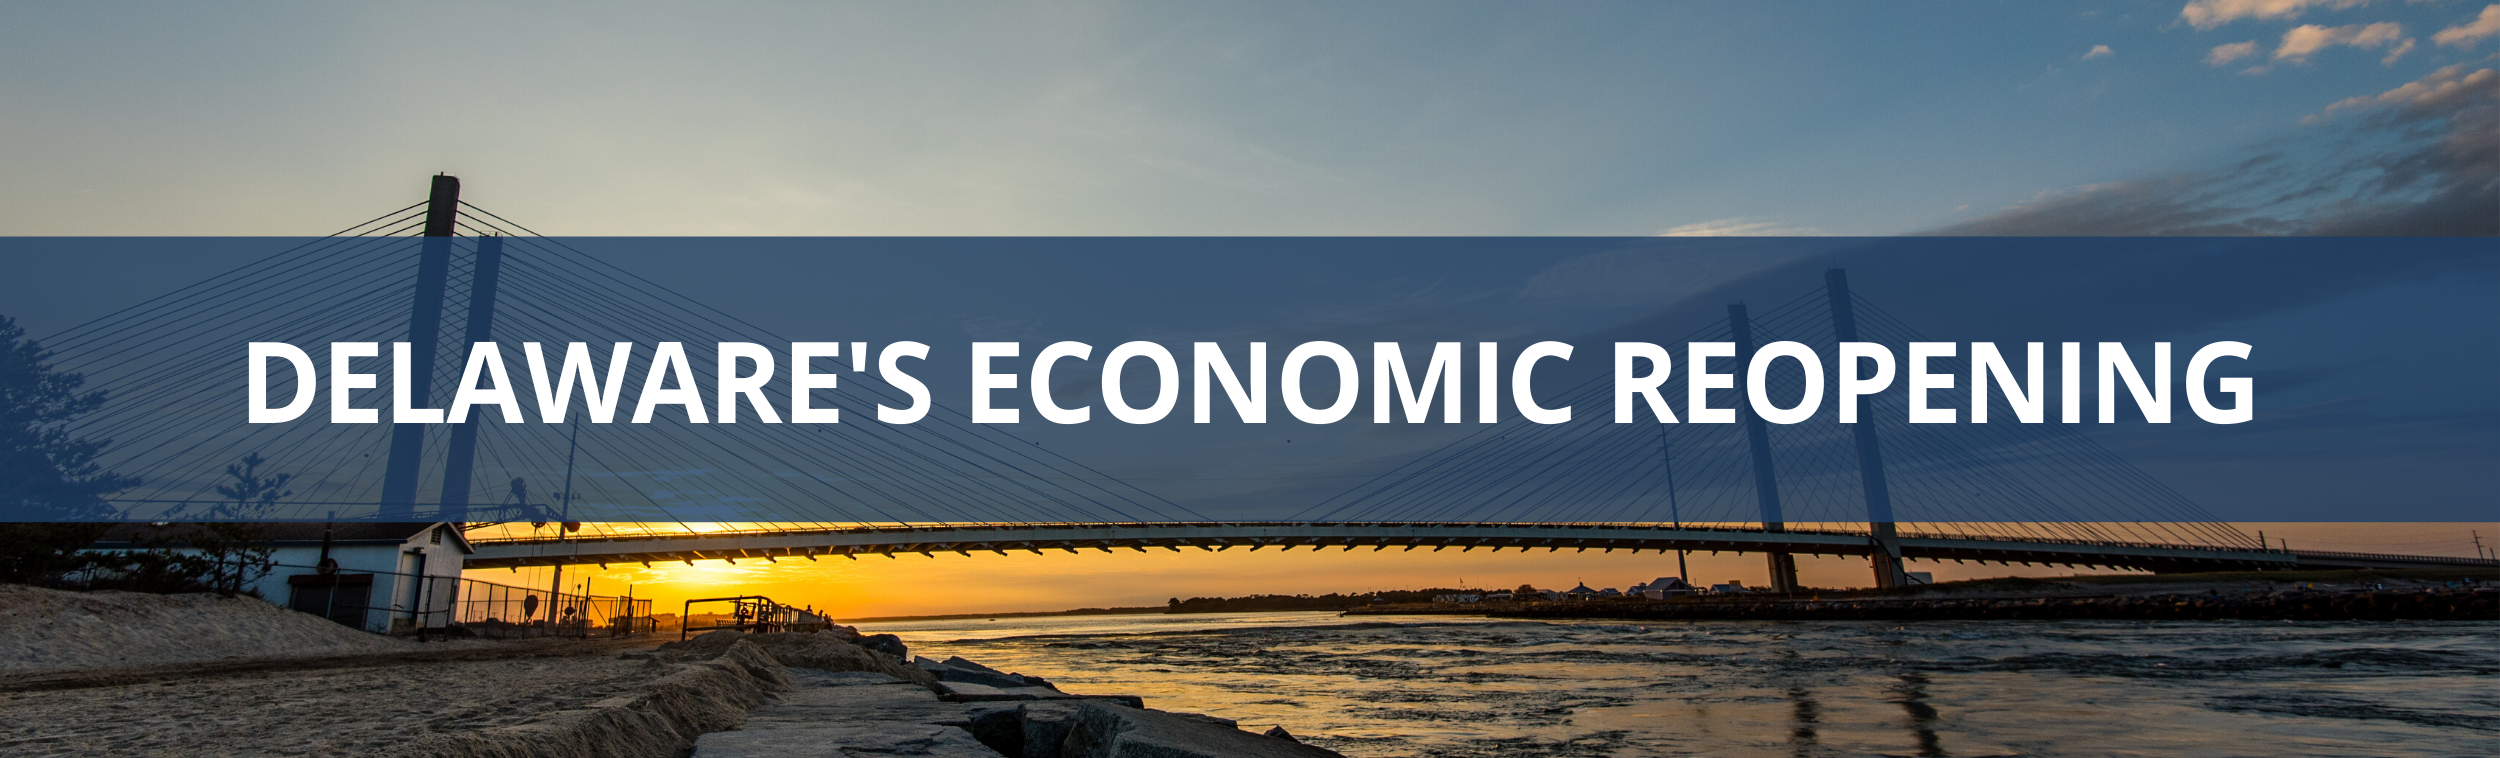 Text over an image of the Indian River Inlet Bridge that reads, "Delaware's Economic Reopening"